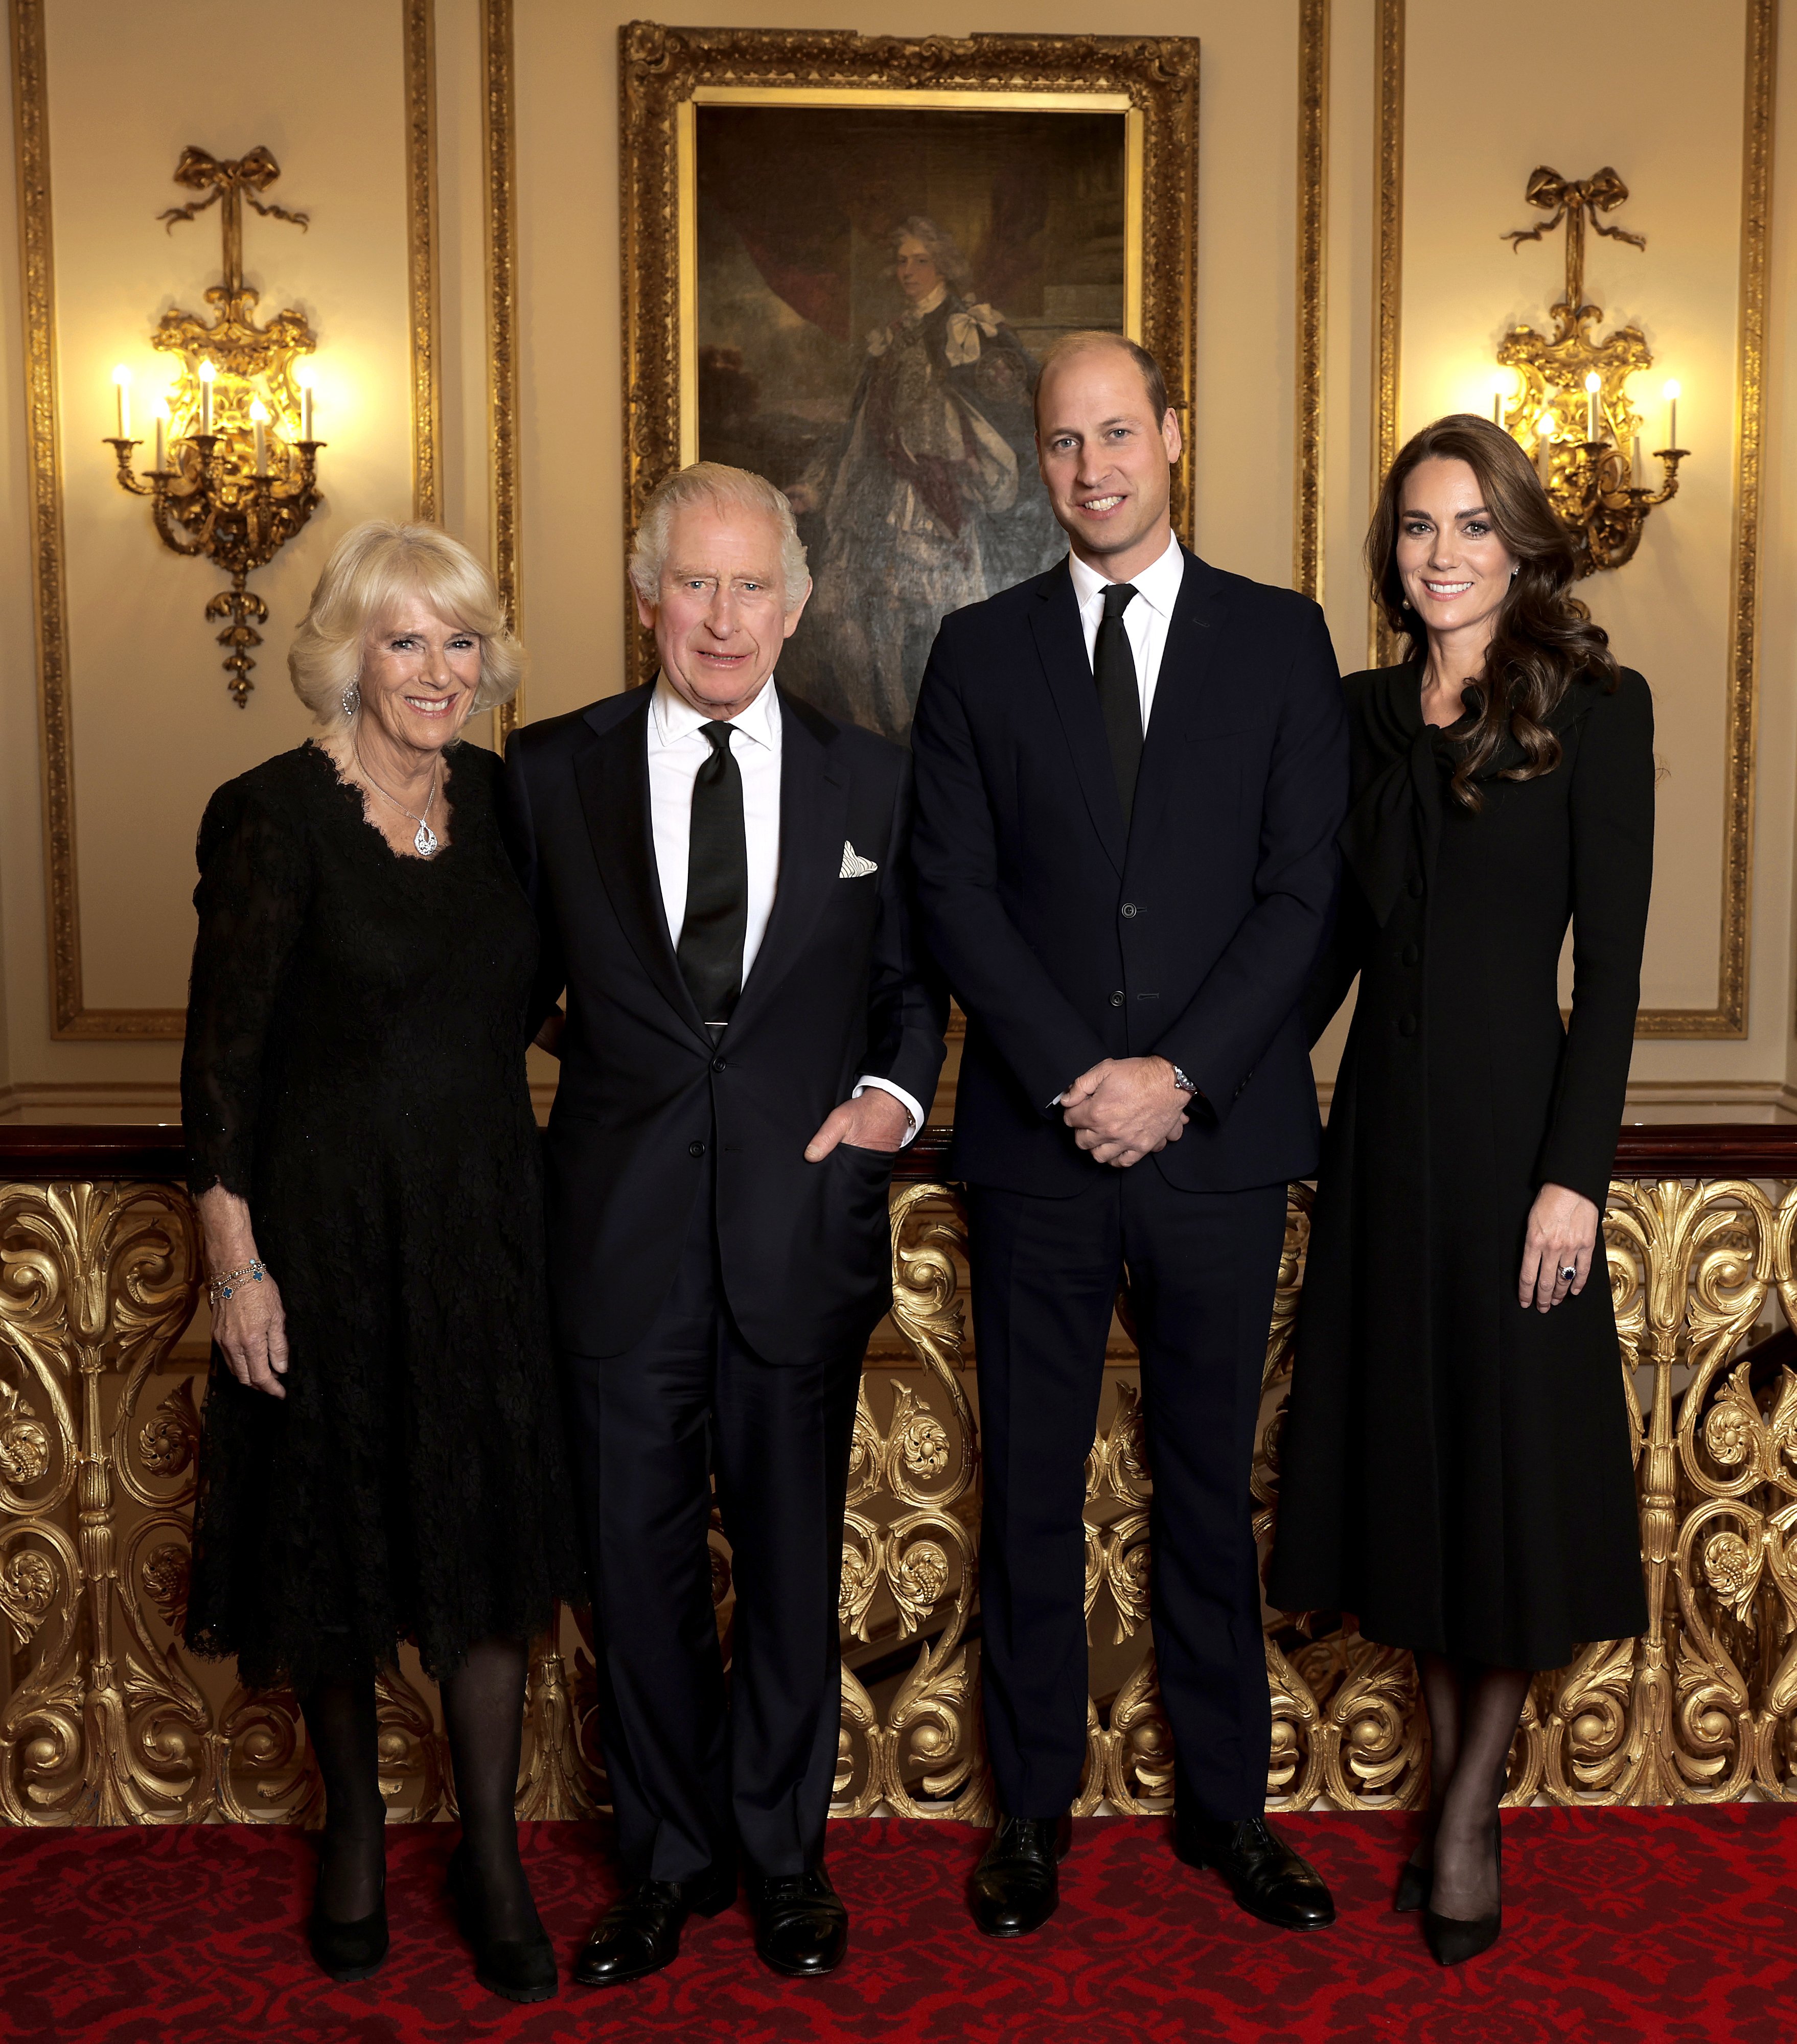 King Charles III, Queen Consort Camilla, Prince William and Kate Middleton in London 2022. | Source: Getty Images 